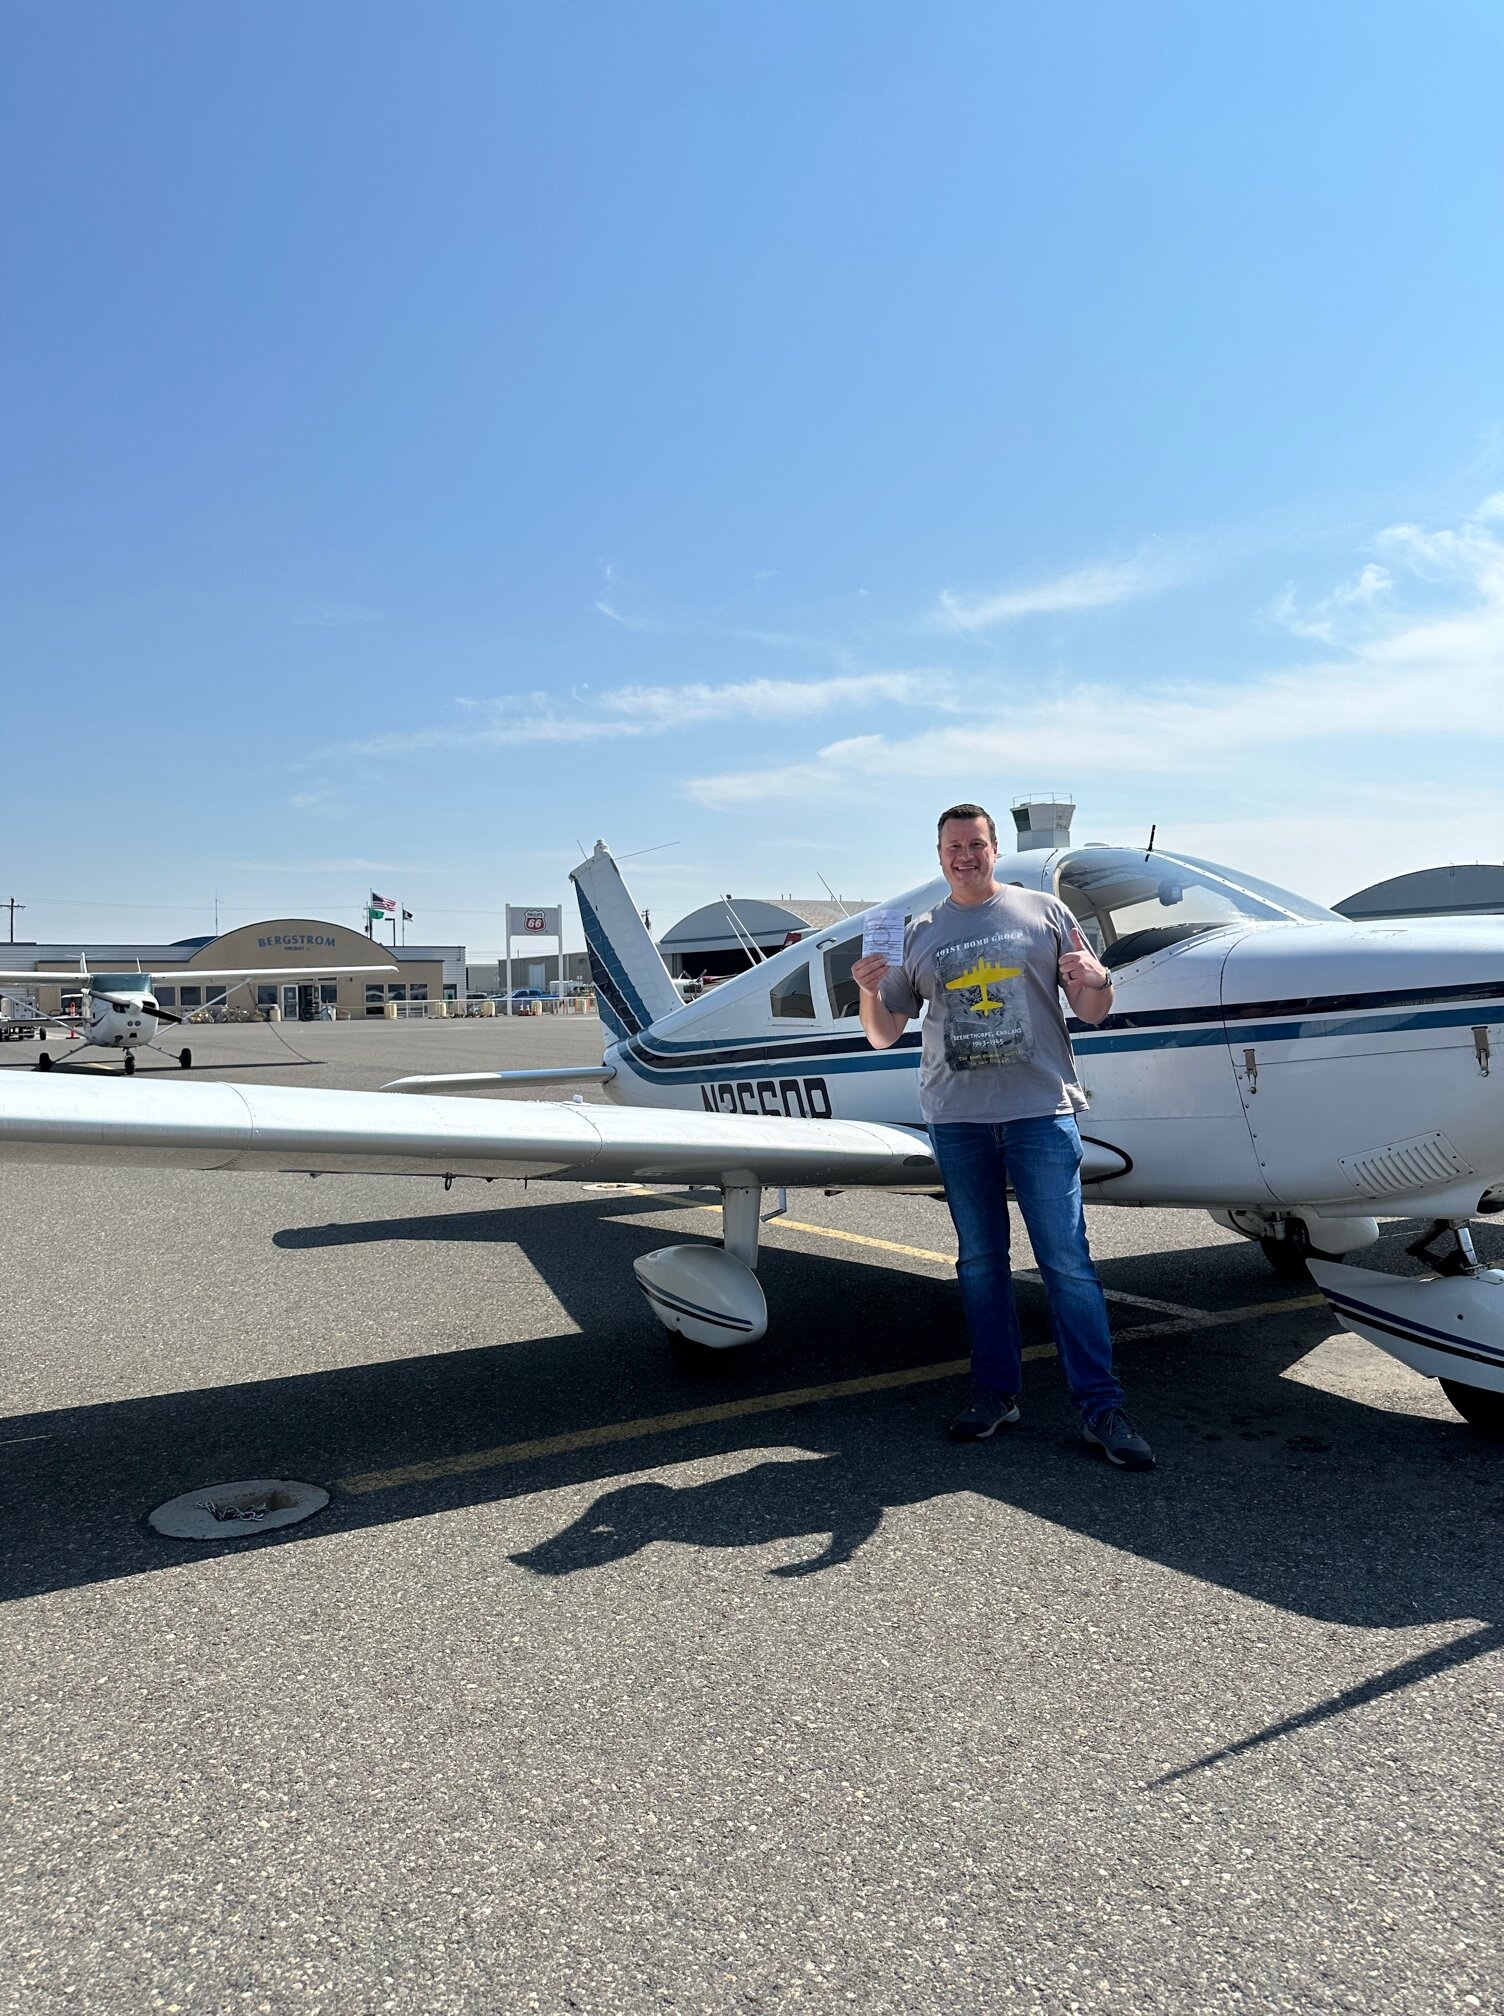 Congratulations to our latest accelerated PPL Student, Brian, he just passed his PPL checkride with us.

Inquire on our website for the fastest way to earn your
PPL!
Www.Mach-six.us
-
-
-
-
-
-#aviation #plane #planespotting #planes#aviations
#plane
